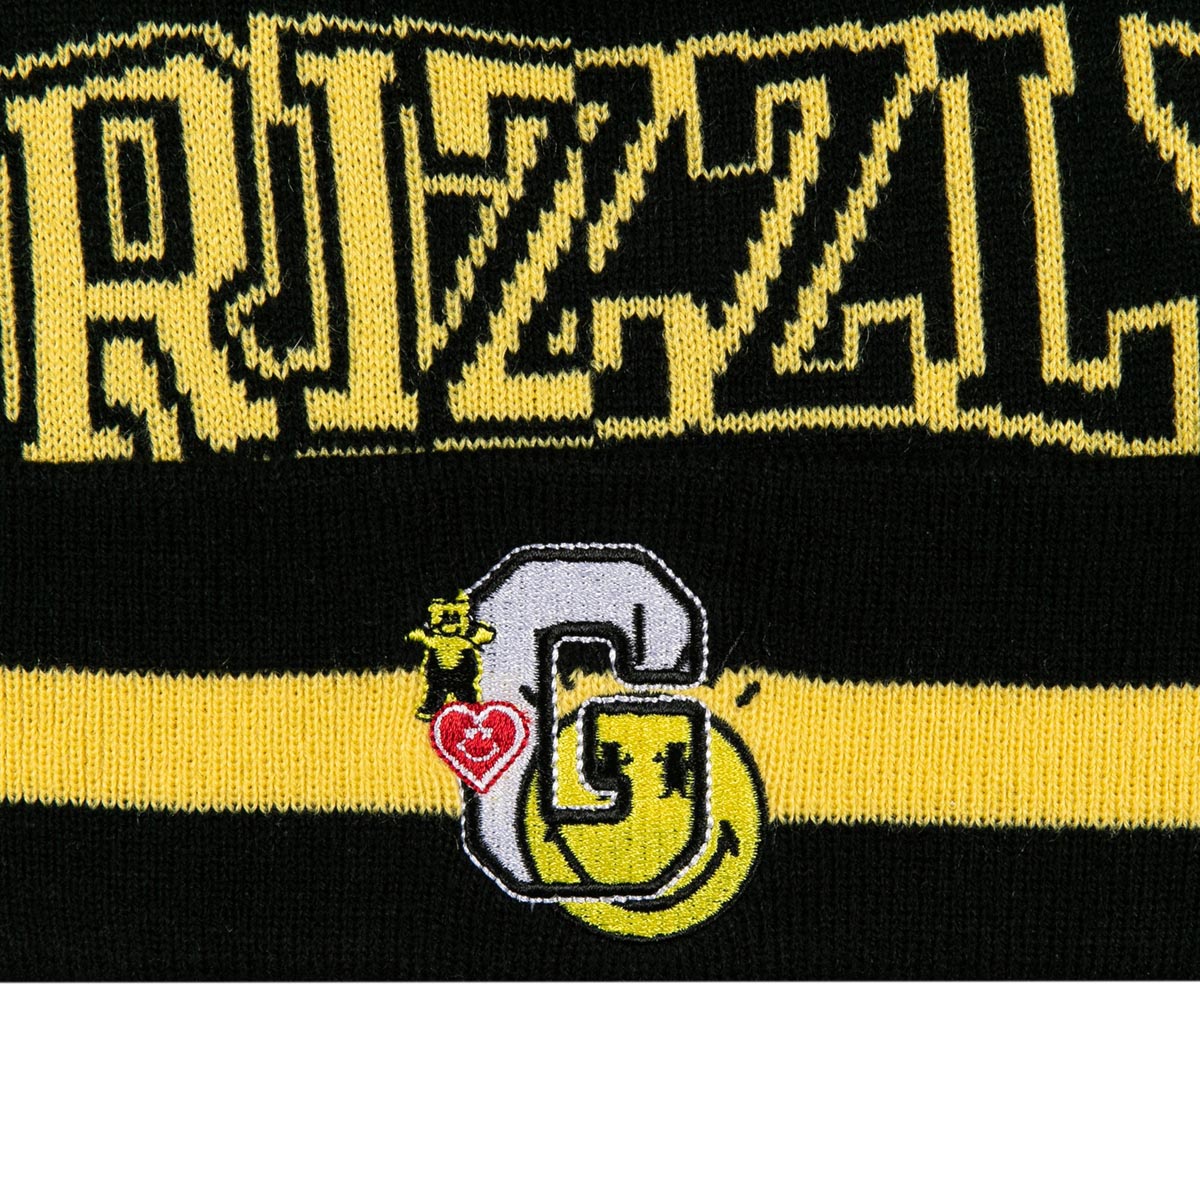 Grizzly x Smiley World School Of Happines Beanie - Black image 3